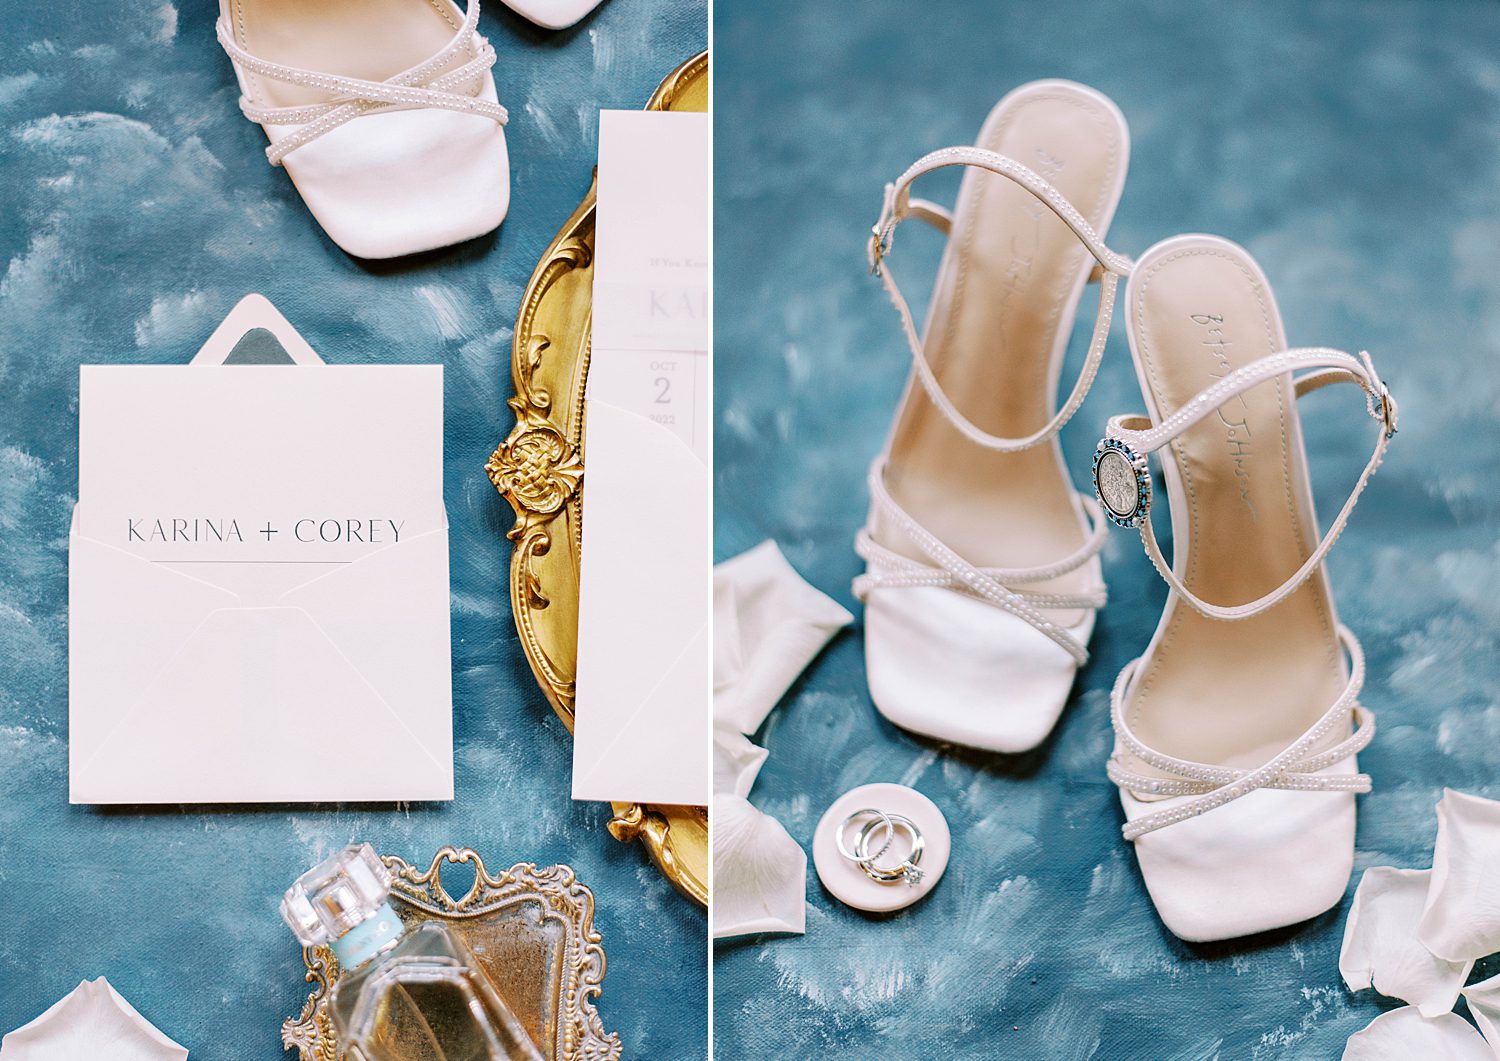 bride's white shoes and details for intimate Oxford Exchange wedding day